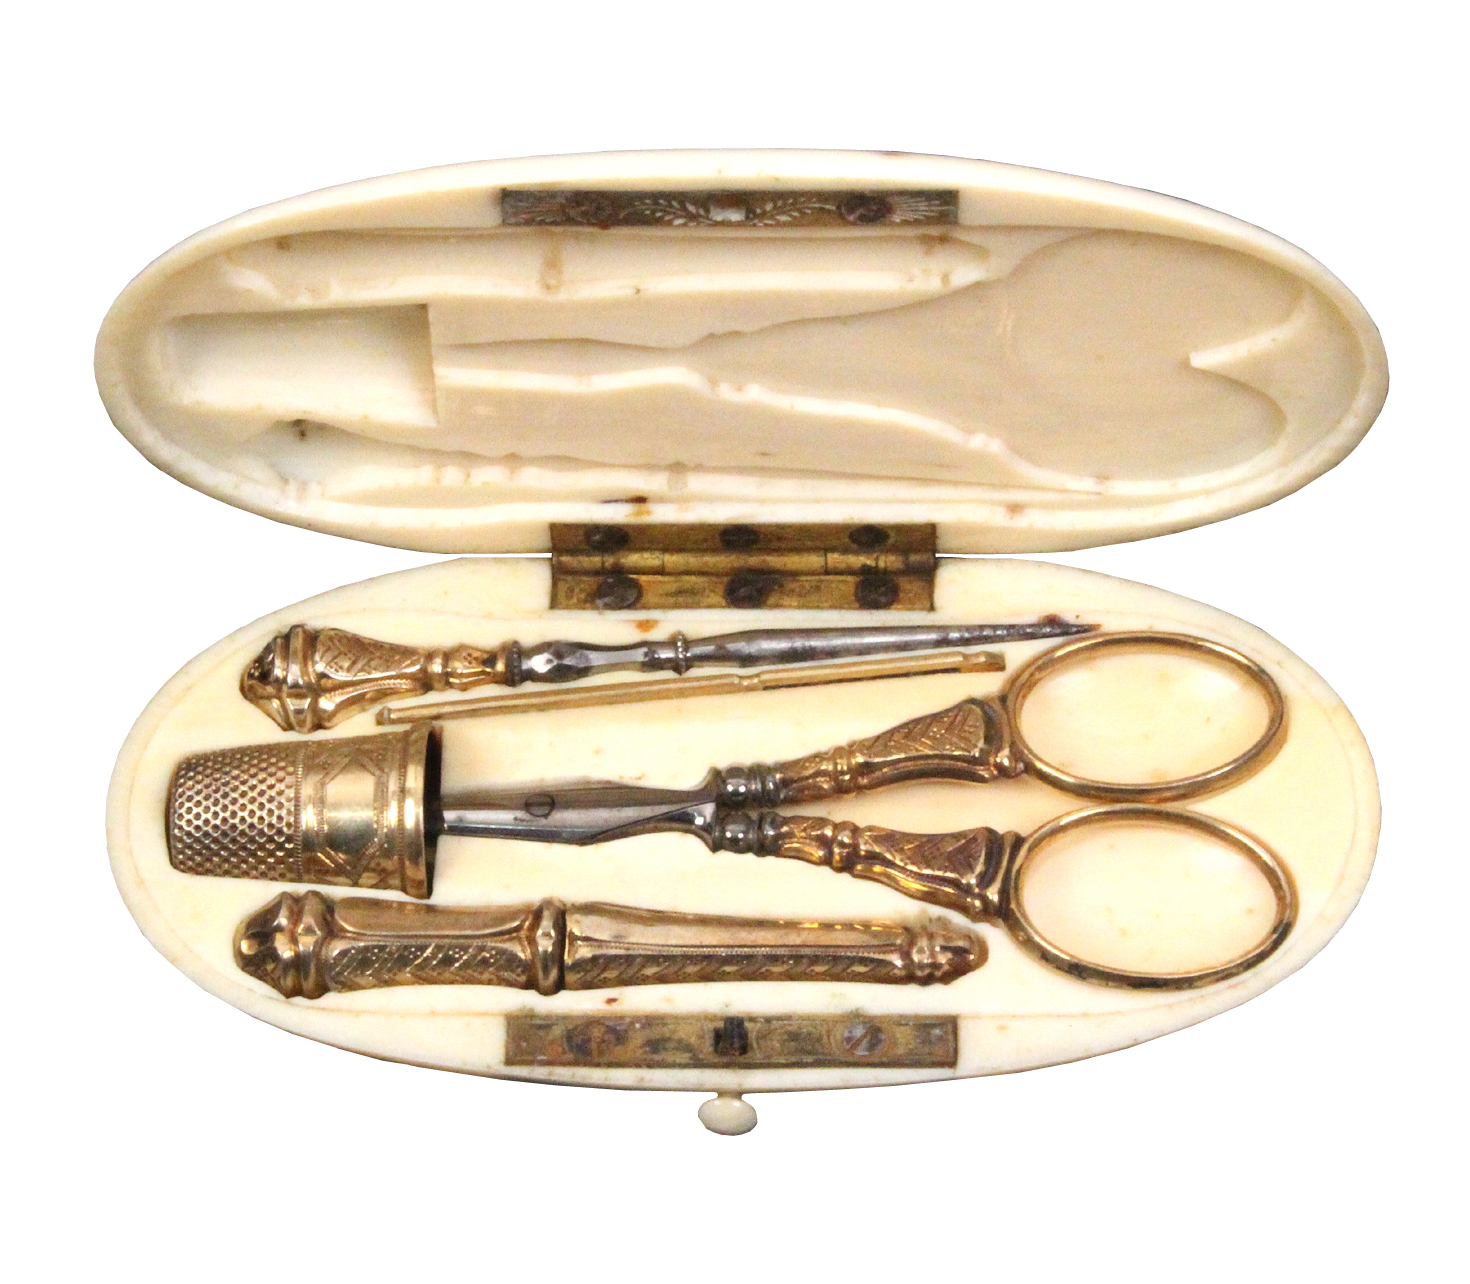 A French oval ivory etui, gilt metal fittings, circa 1890, the case with engraved monogram 'SIC',